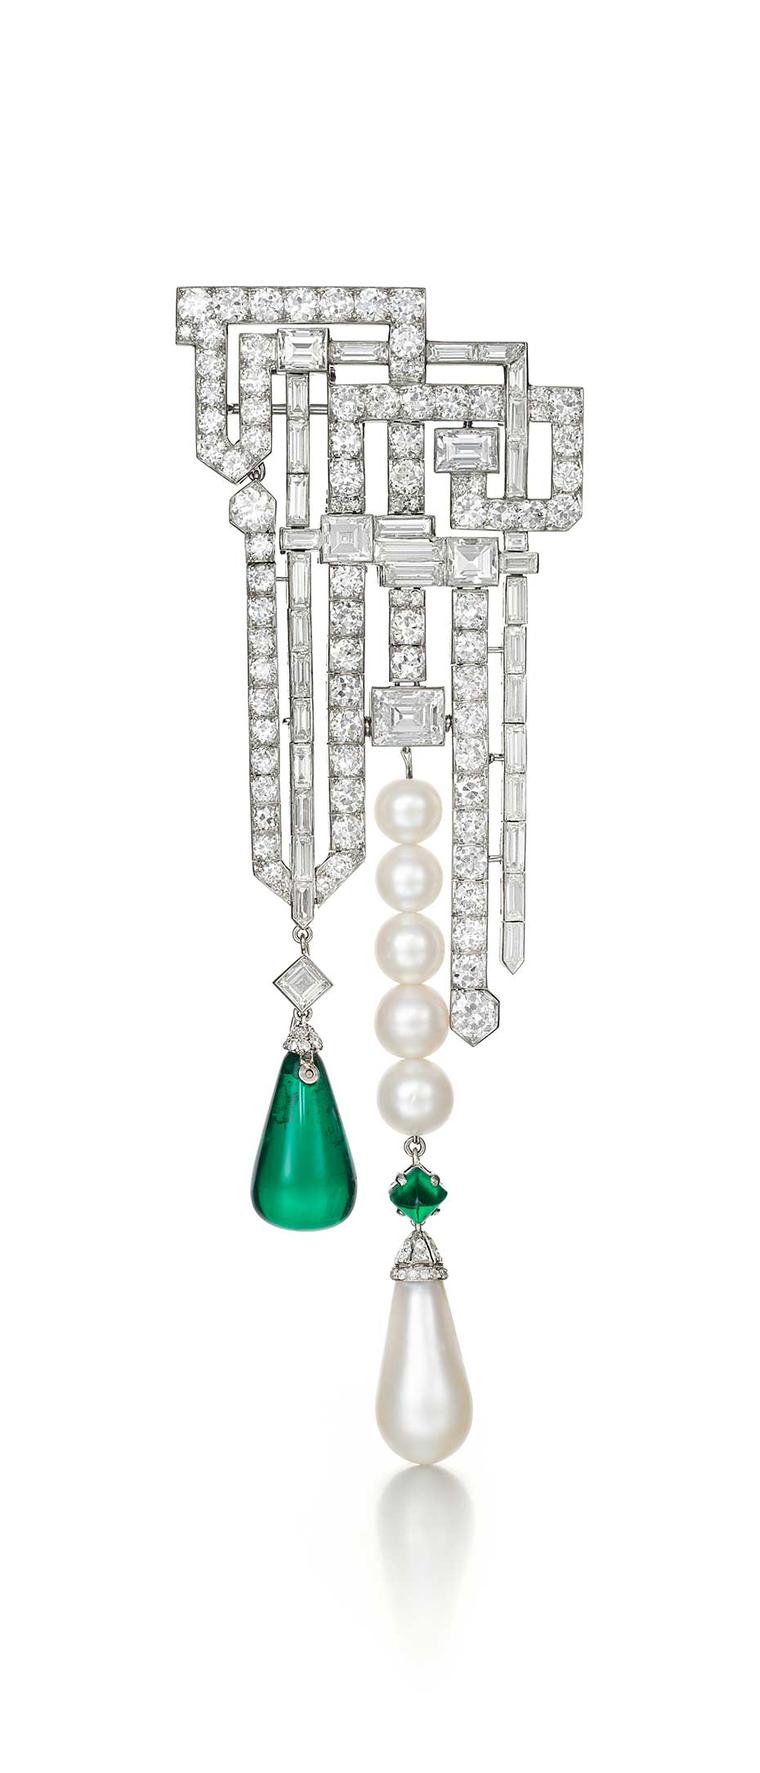 Siegelson will be bringing this Van Cleef & Arpels diamond, emerald and pearl brooch dating from 1926